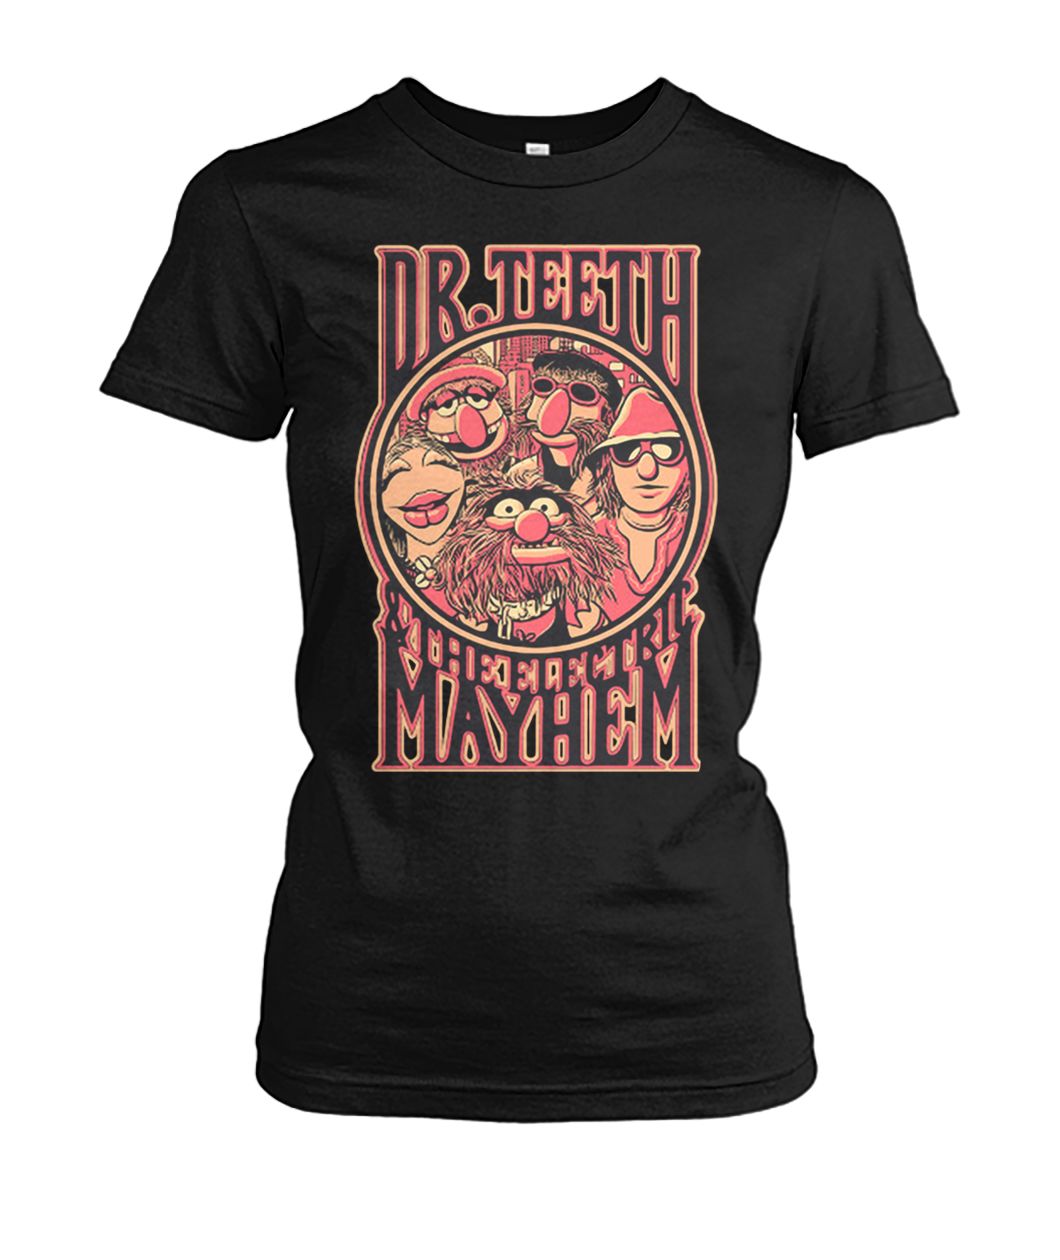 Muppets show dr. teeth and the electric mayhem women's crew tee